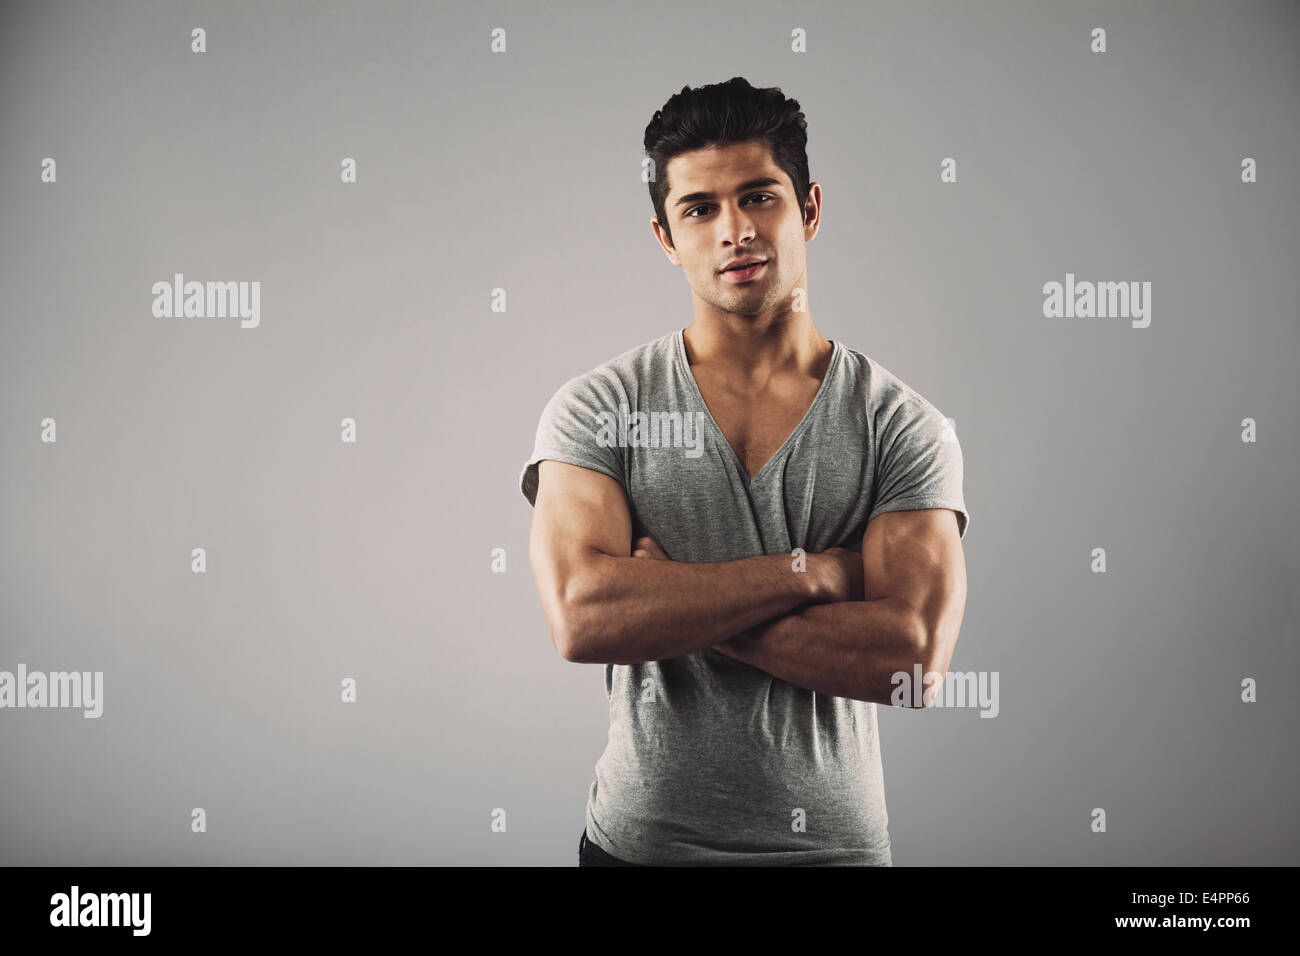 Portrait of young muscular man posing against grey background. Handsome young hispanic male model standing with his arms crossed Stock Photo